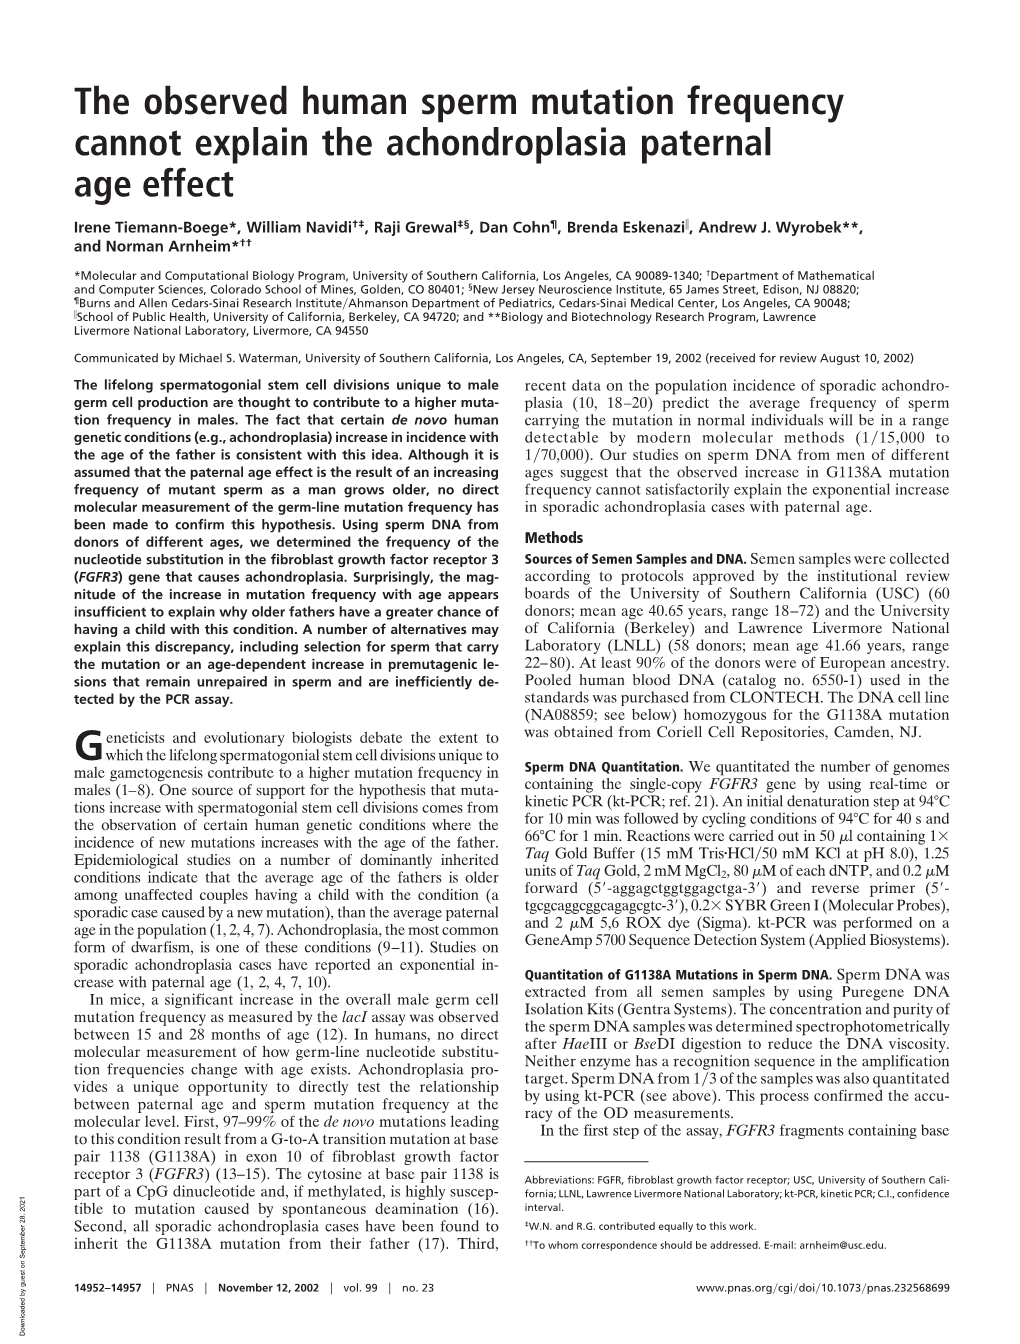 The Observed Human Sperm Mutation Frequency Cannot Explain the Achondroplasia Paternal Age Effect